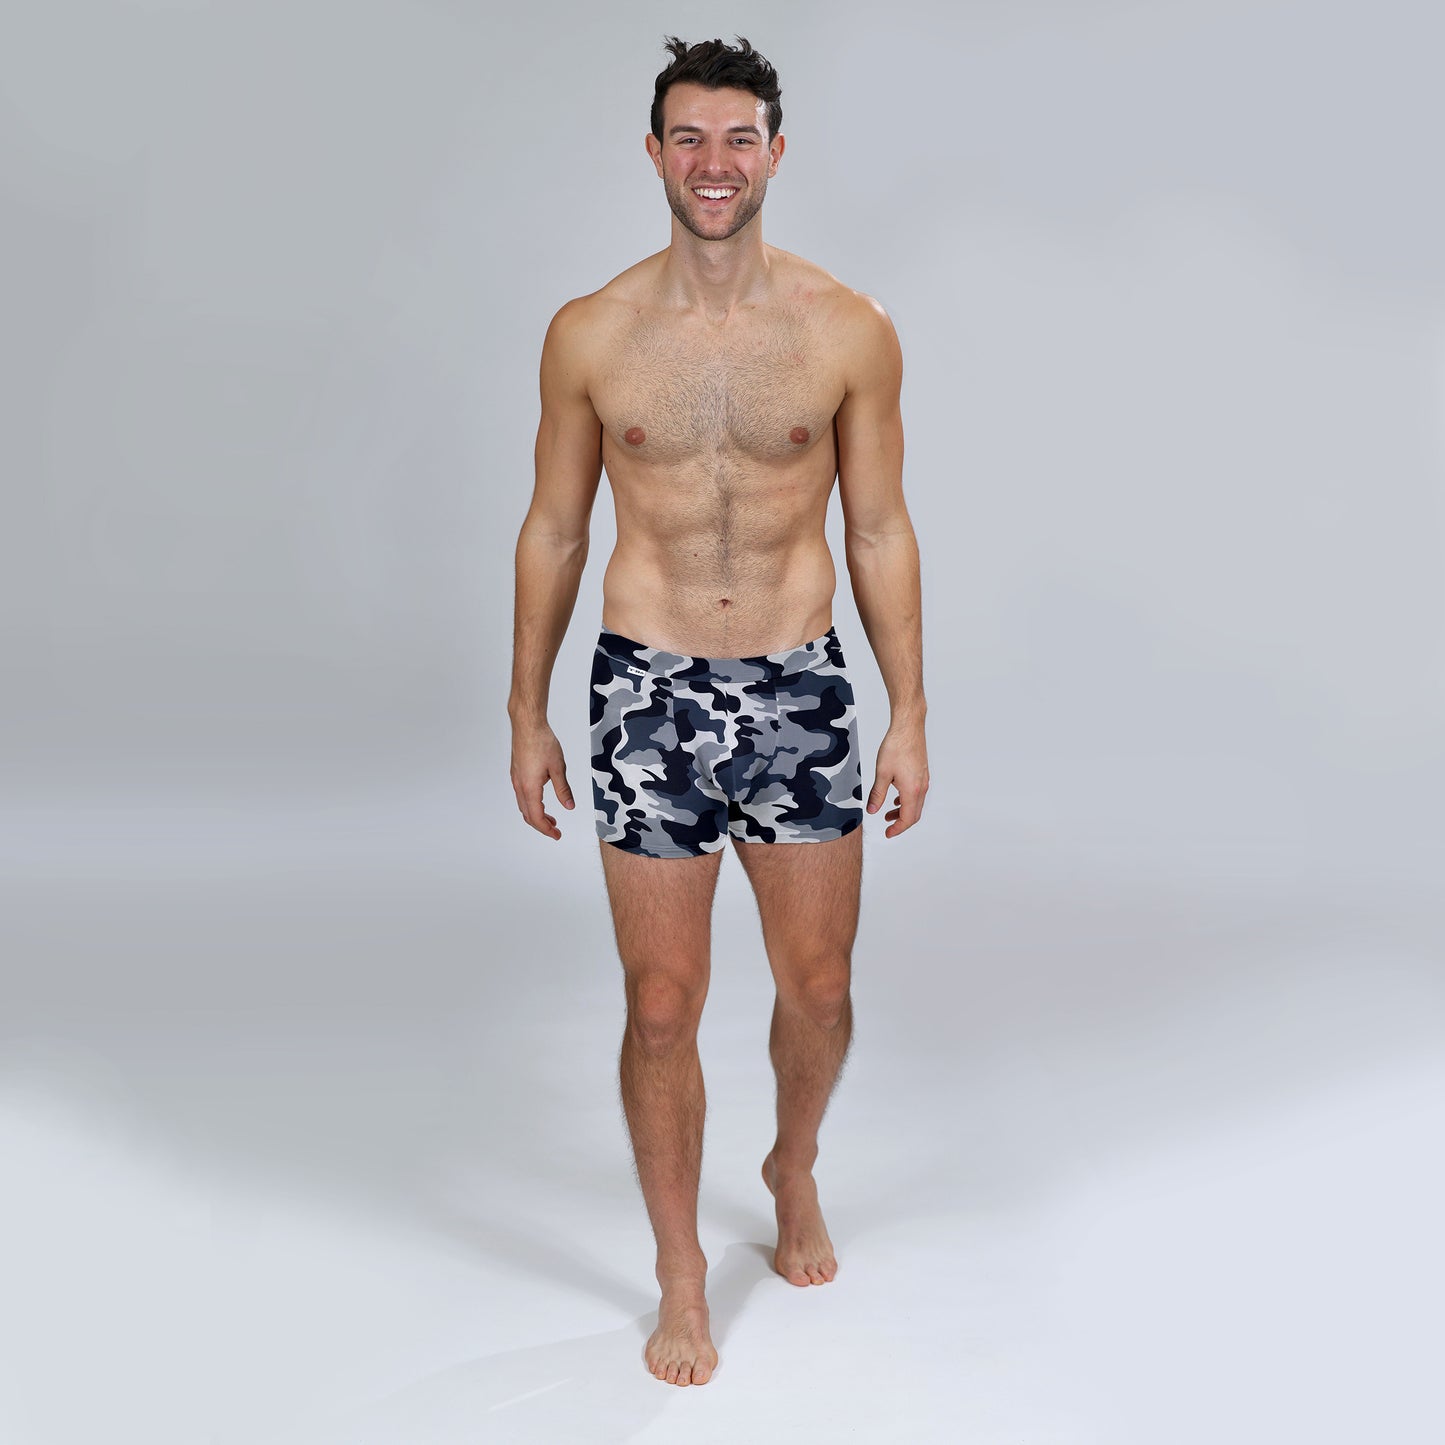 The Limited Edition Blue Camo Boxer Brief for men in the USA and Canada